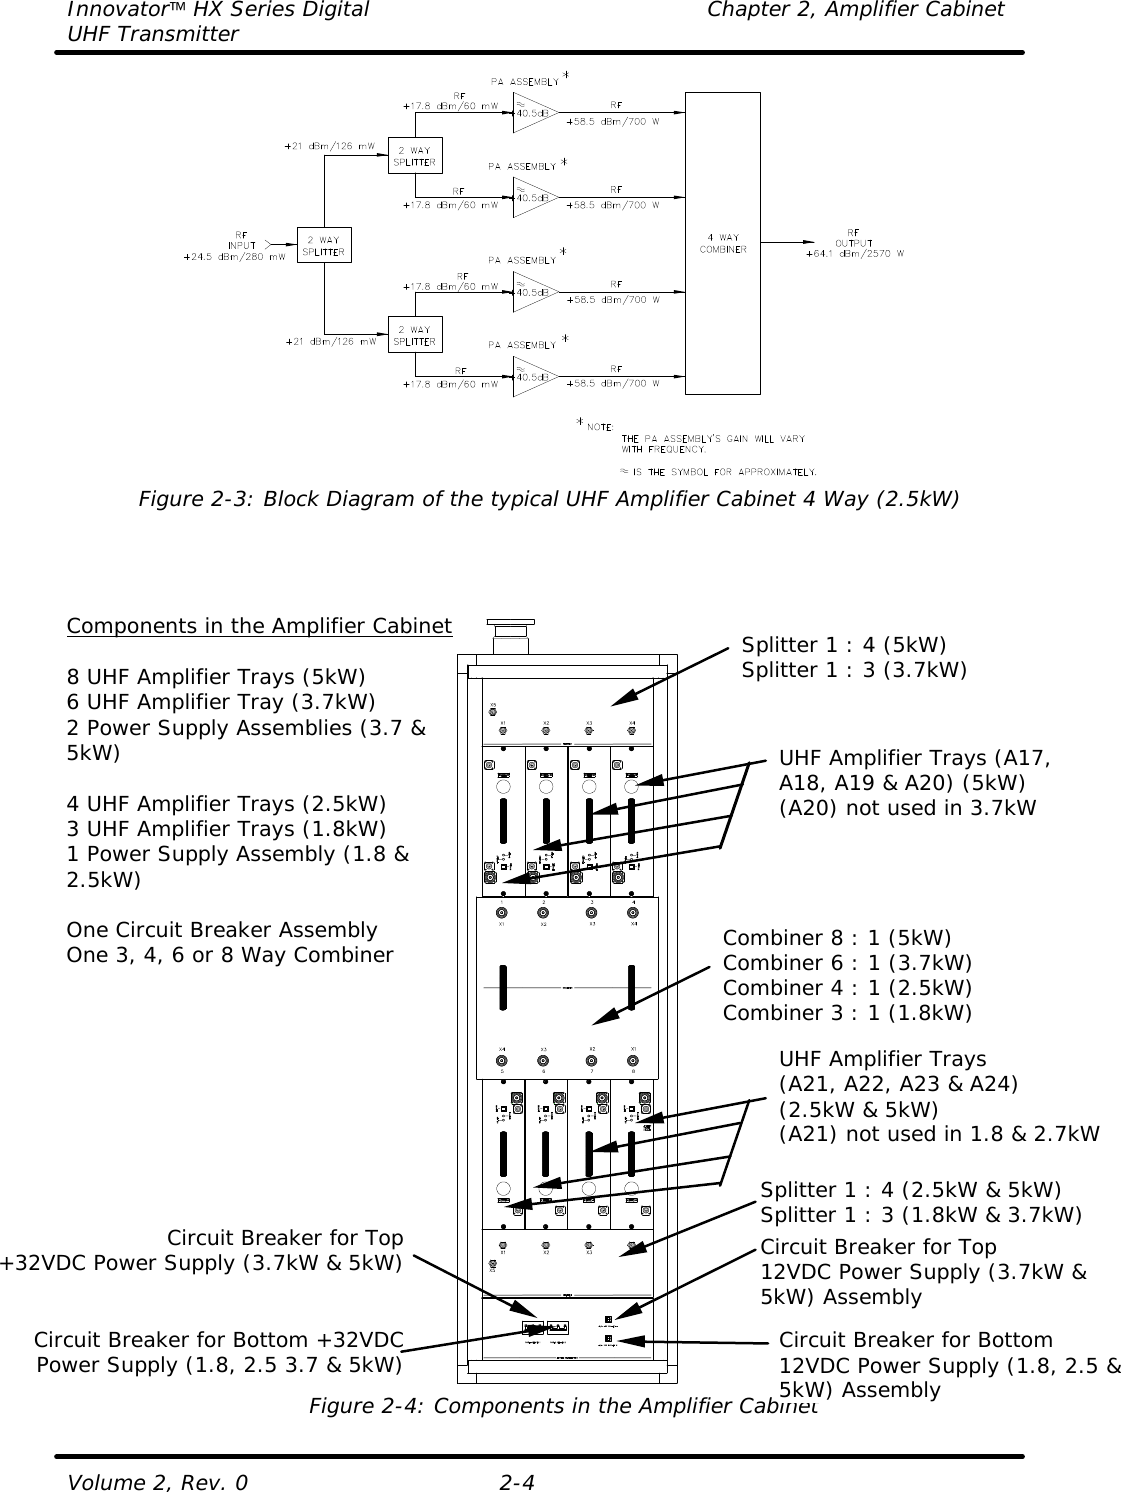 Innovator HX Series Digital Chapter 2, Amplifier Cabinet UHF Transmitter Volume 2, Rev. 0 2-4  Figure 2-3: Block Diagram of the typical UHF Amplifier Cabinet 4 Way (2.5kW)      Figure 2-4: Components in the Amplifier Cabinet Components in the Amplifier Cabinet  8 UHF Amplifier Trays (5kW) 6 UHF Amplifier Tray (3.7kW) 2 Power Supply Assemblies (3.7 &amp; 5kW)  4 UHF Amplifier Trays (2.5kW) 3 UHF Amplifier Trays (1.8kW) 1 Power Supply Assembly (1.8 &amp; 2.5kW)  One Circuit Breaker Assembly One 3, 4, 6 or 8 Way Combiner Assembly Splitter 1 : 4 (5kW) Splitter 1 : 3 (3.7kW) Splitter 1 : 4 (2.5kW &amp; 5kW) Splitter 1 : 3 (1.8kW &amp; 3.7kW) Circuit Breaker for Top 12VDC Power Supply (3.7kW &amp; 5kW) Assembly UHF Amplifier Trays (A17, A18, A19 &amp; A20) (5kW) (A20) not used in 3.7kW UHF Amplifier Trays (A21, A22, A23 &amp; A24) (2.5kW &amp; 5kW) (A21) not used in 1.8 &amp; 2.7kW Combiner 8 : 1 (5kW) Combiner 6 : 1 (3.7kW) Combiner 4 : 1 (2.5kW) Combiner 3 : 1 (1.8kW) Circuit Breaker for Top+32VDC Power Supply (3.7kW &amp; 5kW)Circuit Breaker for Bottom +32VDC Power Supply (1.8, 2.5 3.7 &amp; 5kW)Circuit Breaker for Bottom 12VDC Power Supply (1.8, 2.5 &amp; 5kW) Assembly 